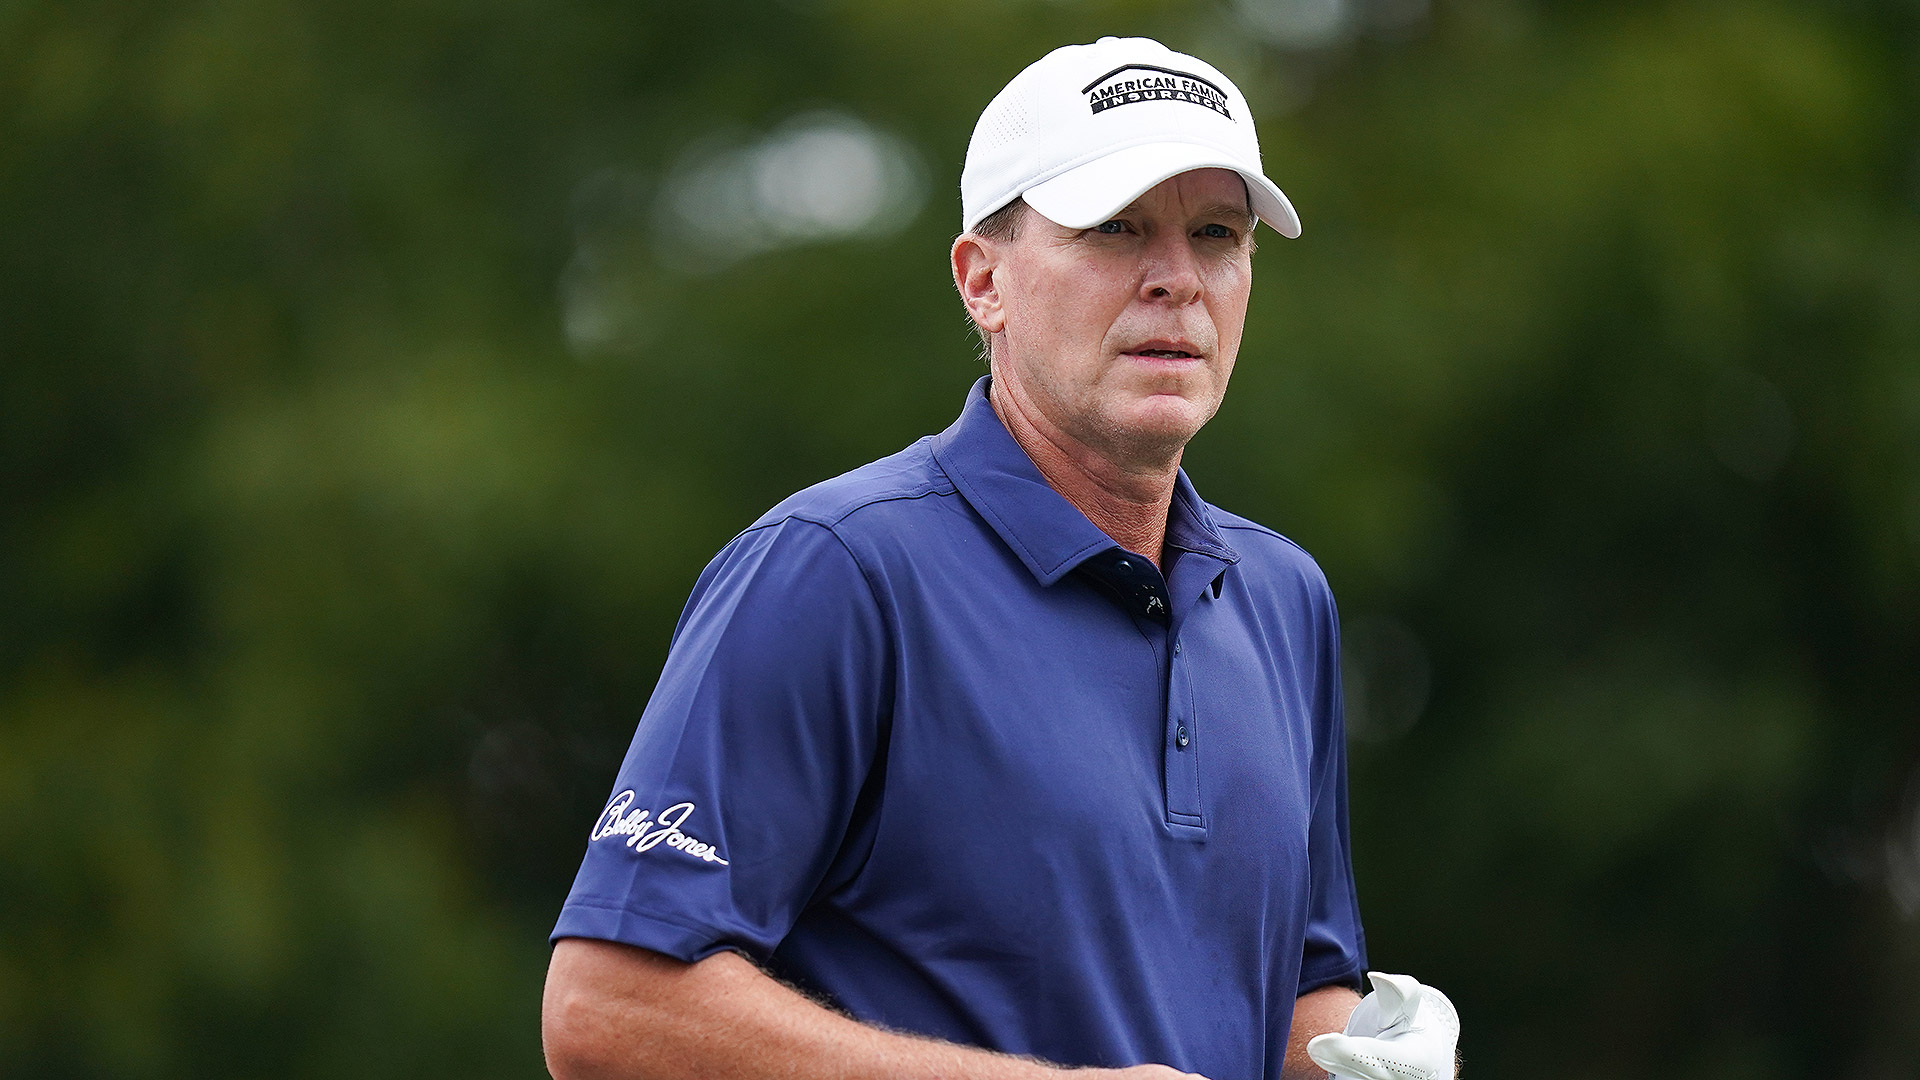 Report: Steve Stricker ‘lucky’ to be alive after being hospitalized for two weeks